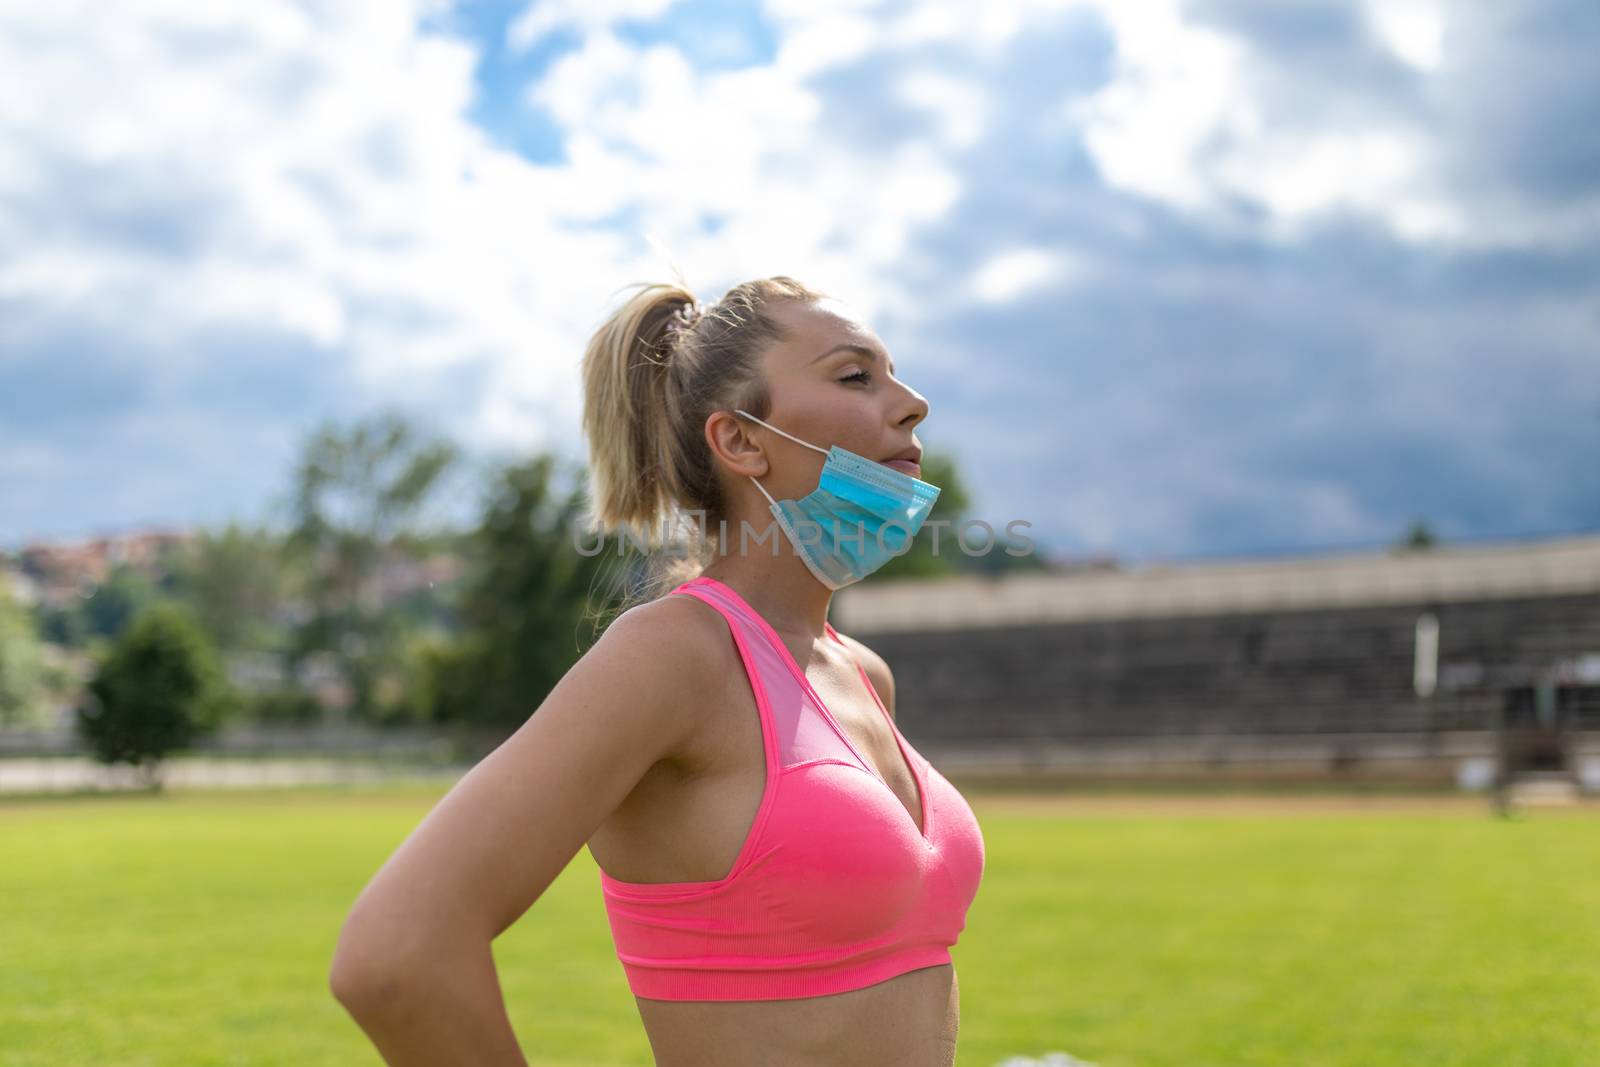 Woman takes off facemask after training or running on sports field. Female breathes deeply